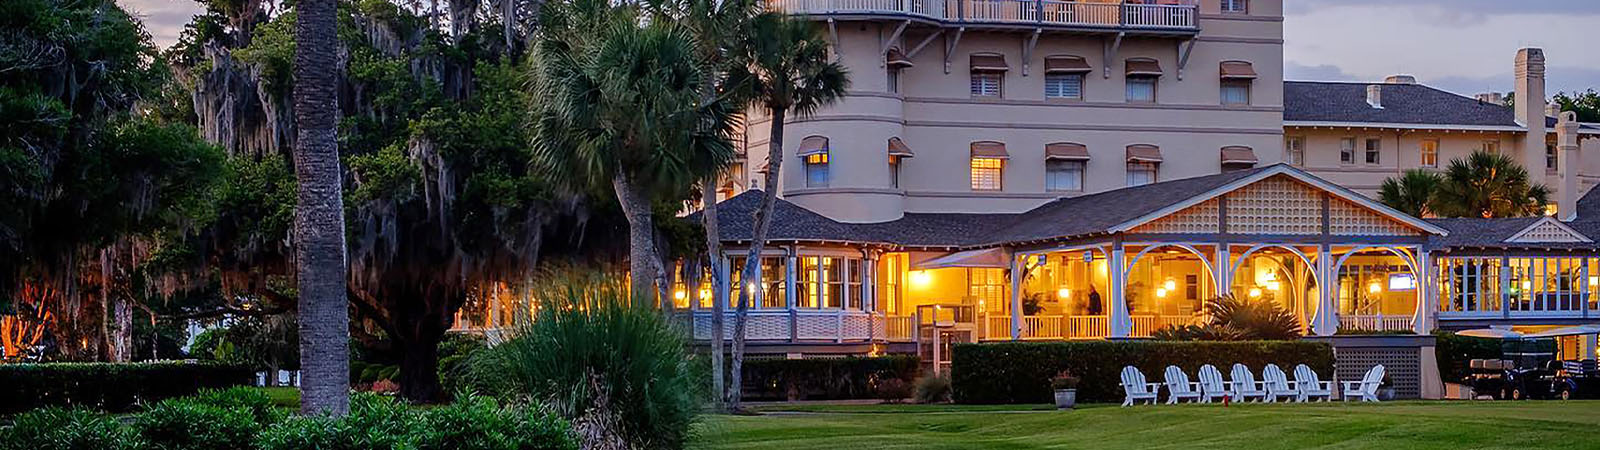 Jekyll Island and St. Augustine “The Life of Millionaires”